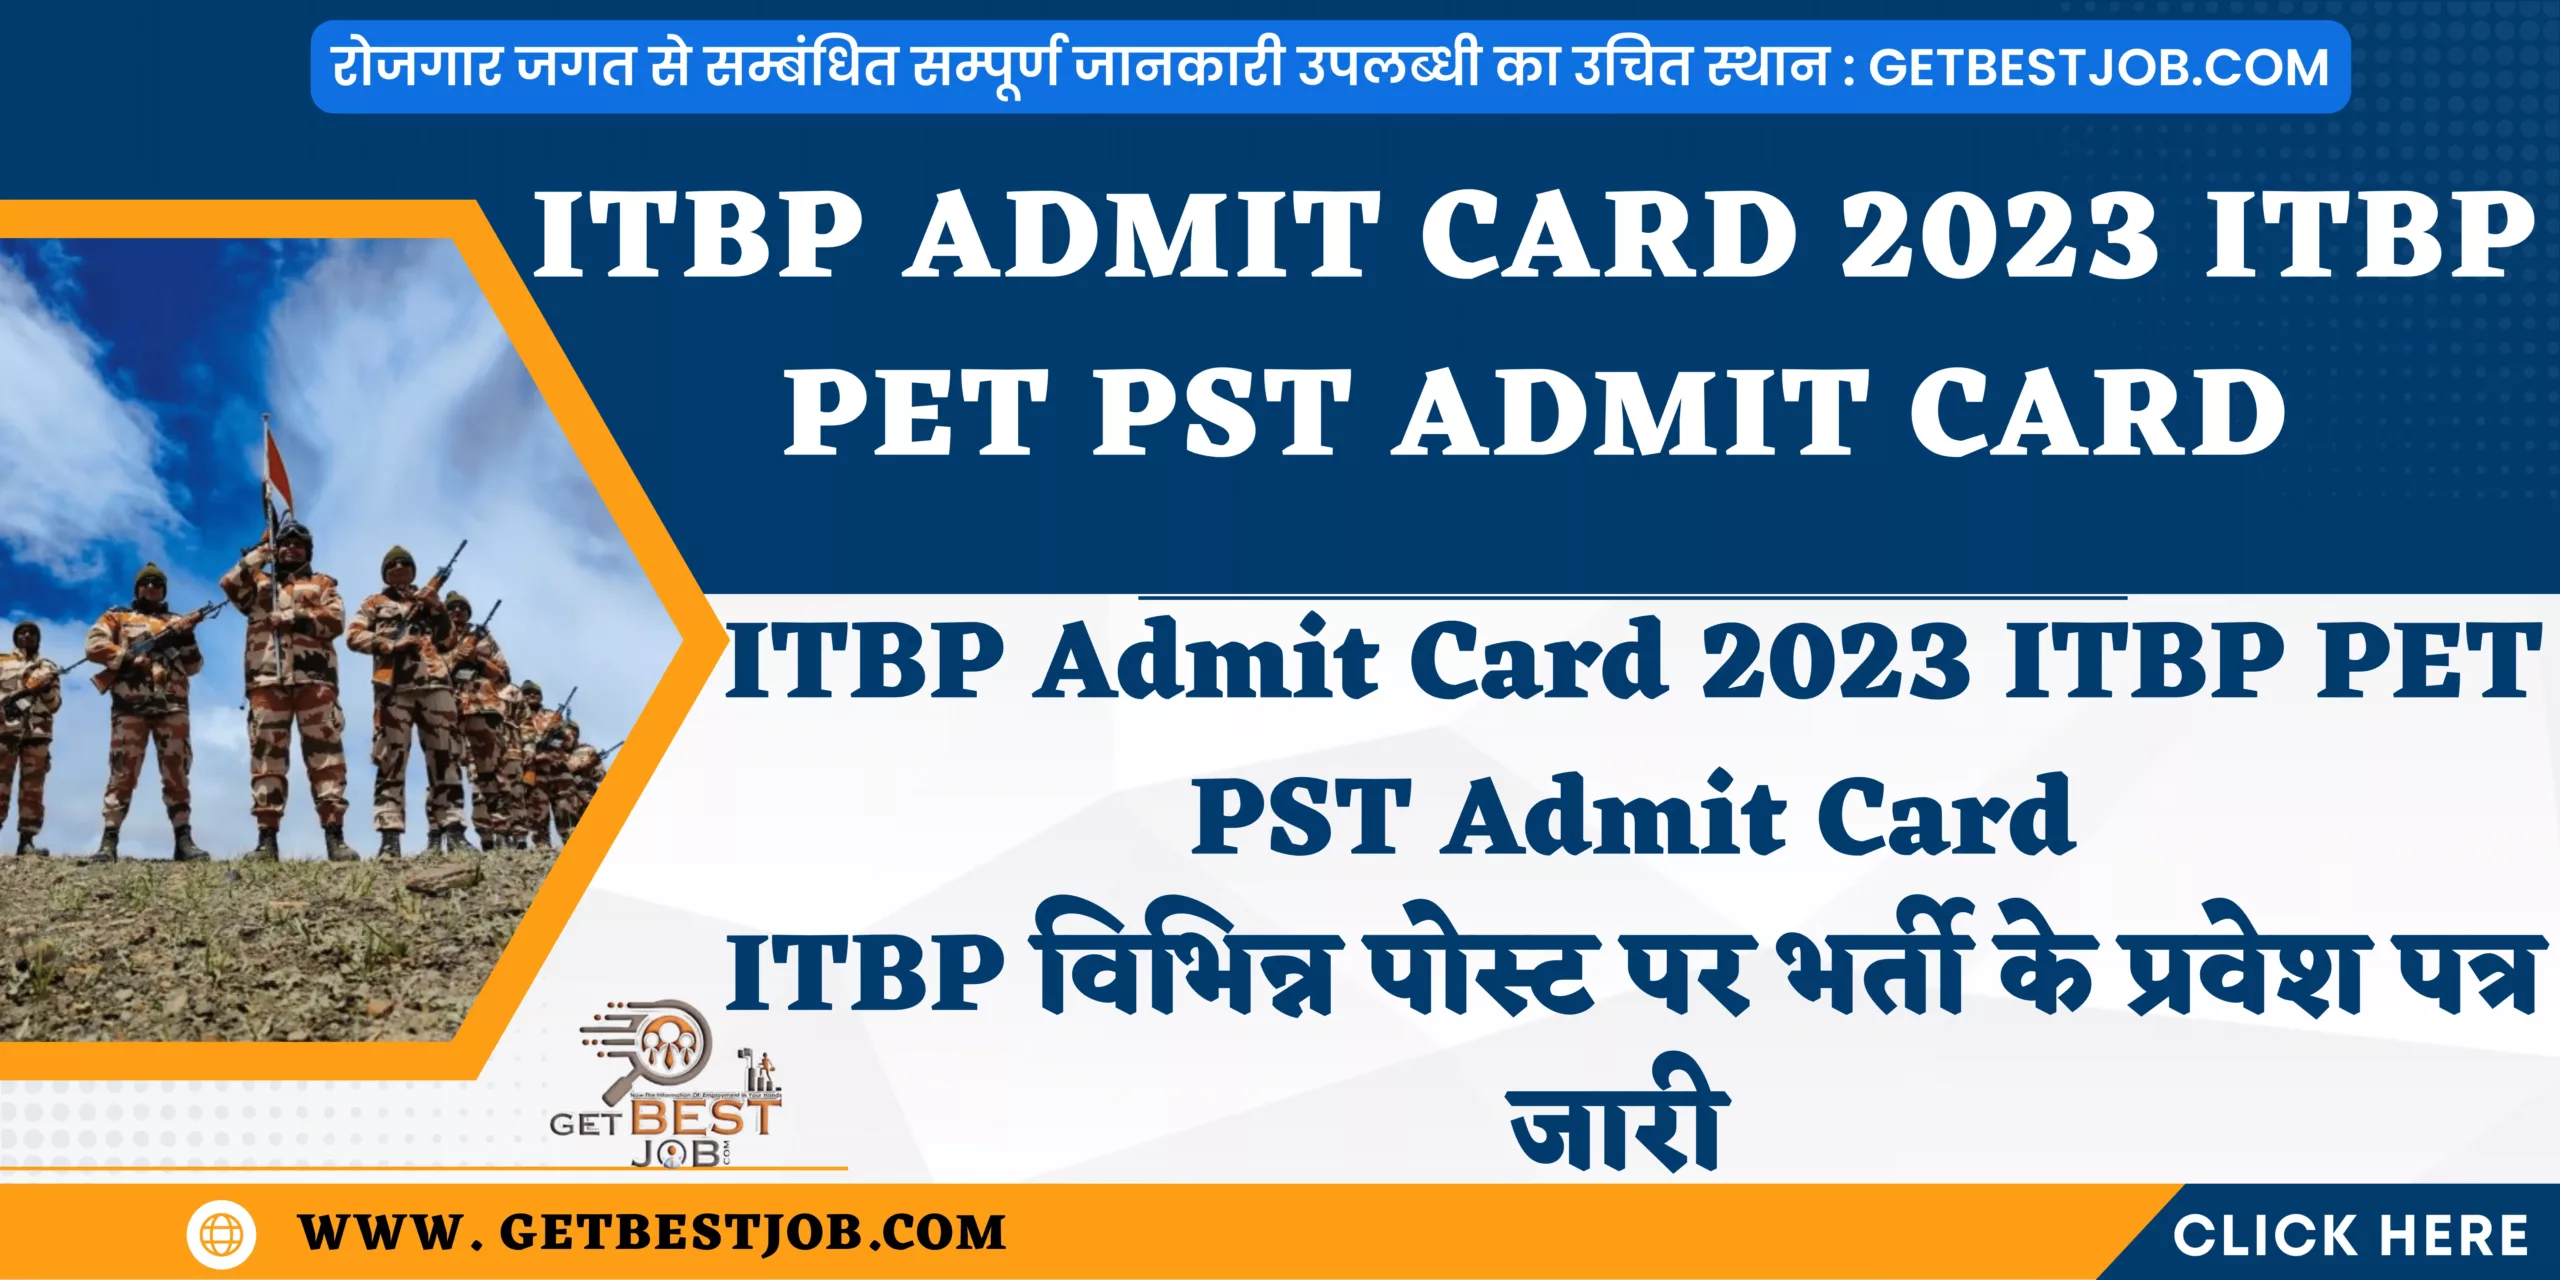 ITBP Admit Card 2023 ITBP PET PST Admit Card Indo Tibetan Border Police (ITBP) Force 50 Post Constable (Animals Transport), Indo Tibetan Border Police (ITBP) Force 113 Post Constable (Pioneer), Indo Tibetan Border Police (ITBP) Force 11 Assistant Commandant Transport, Indo Tibetan Border Police (ITBP) Force 293 Head Constable (Tele Communication), Indo Tibetan Border Police (ITBP) Force 186 Constable (Motor Mechanic), Indo Tibetan Border Police (ITBP) Force 40 Head Constable (Dresser Veterinary), Indo Tibetan Border Police (ITBP) Force 34 ASI Pharmacist, Indo Tibetan Border Police (ITBP) Force,